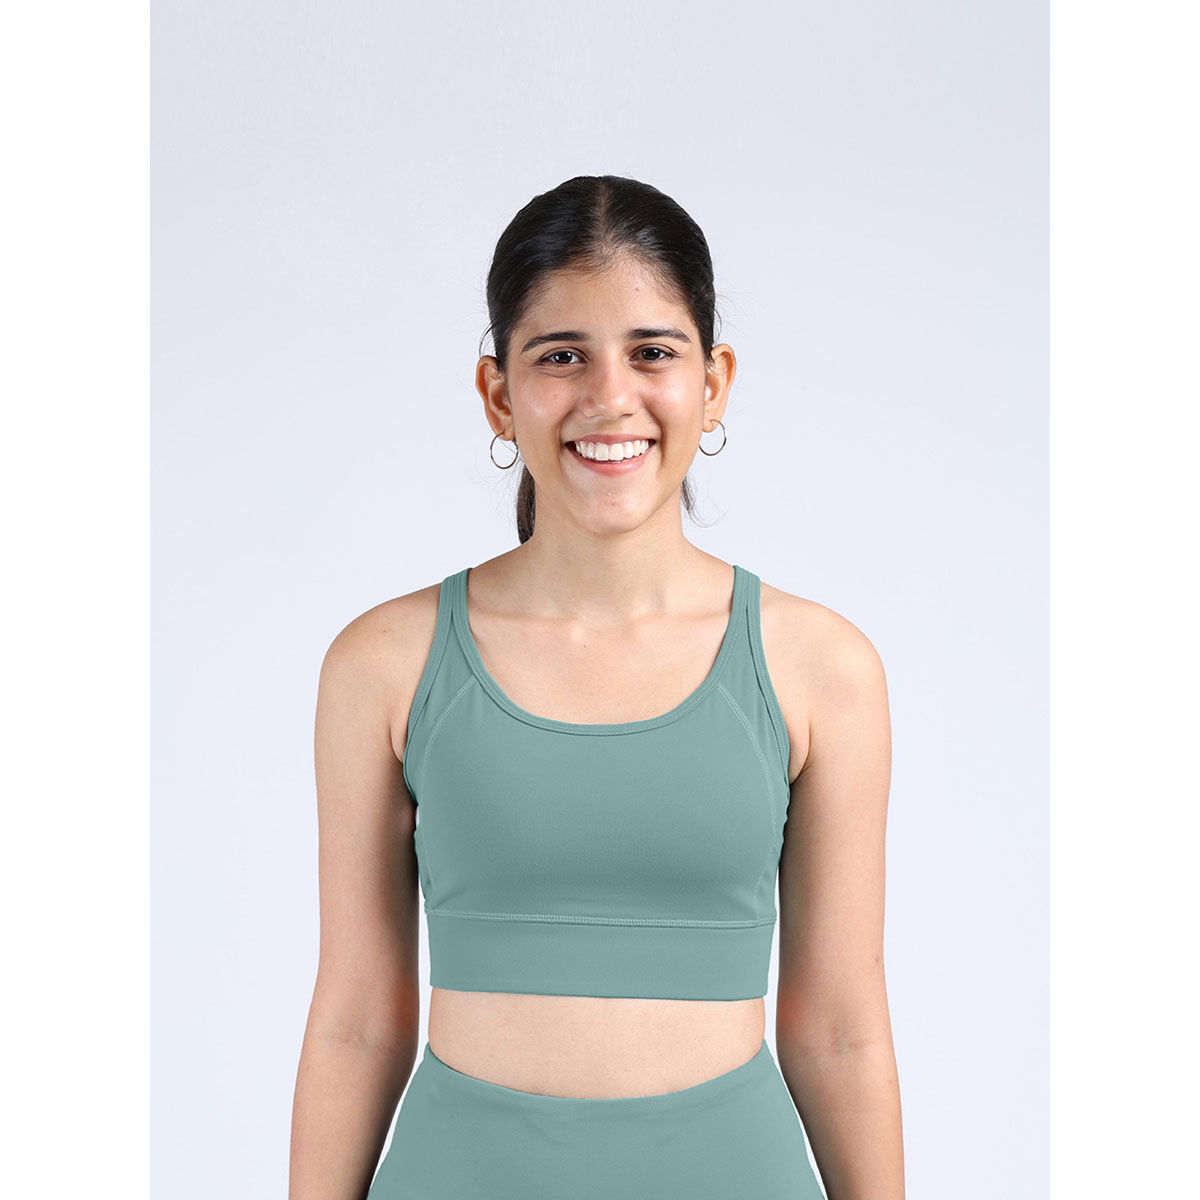 Buy Sports Bras with Pockets for Women Online from Blissclub